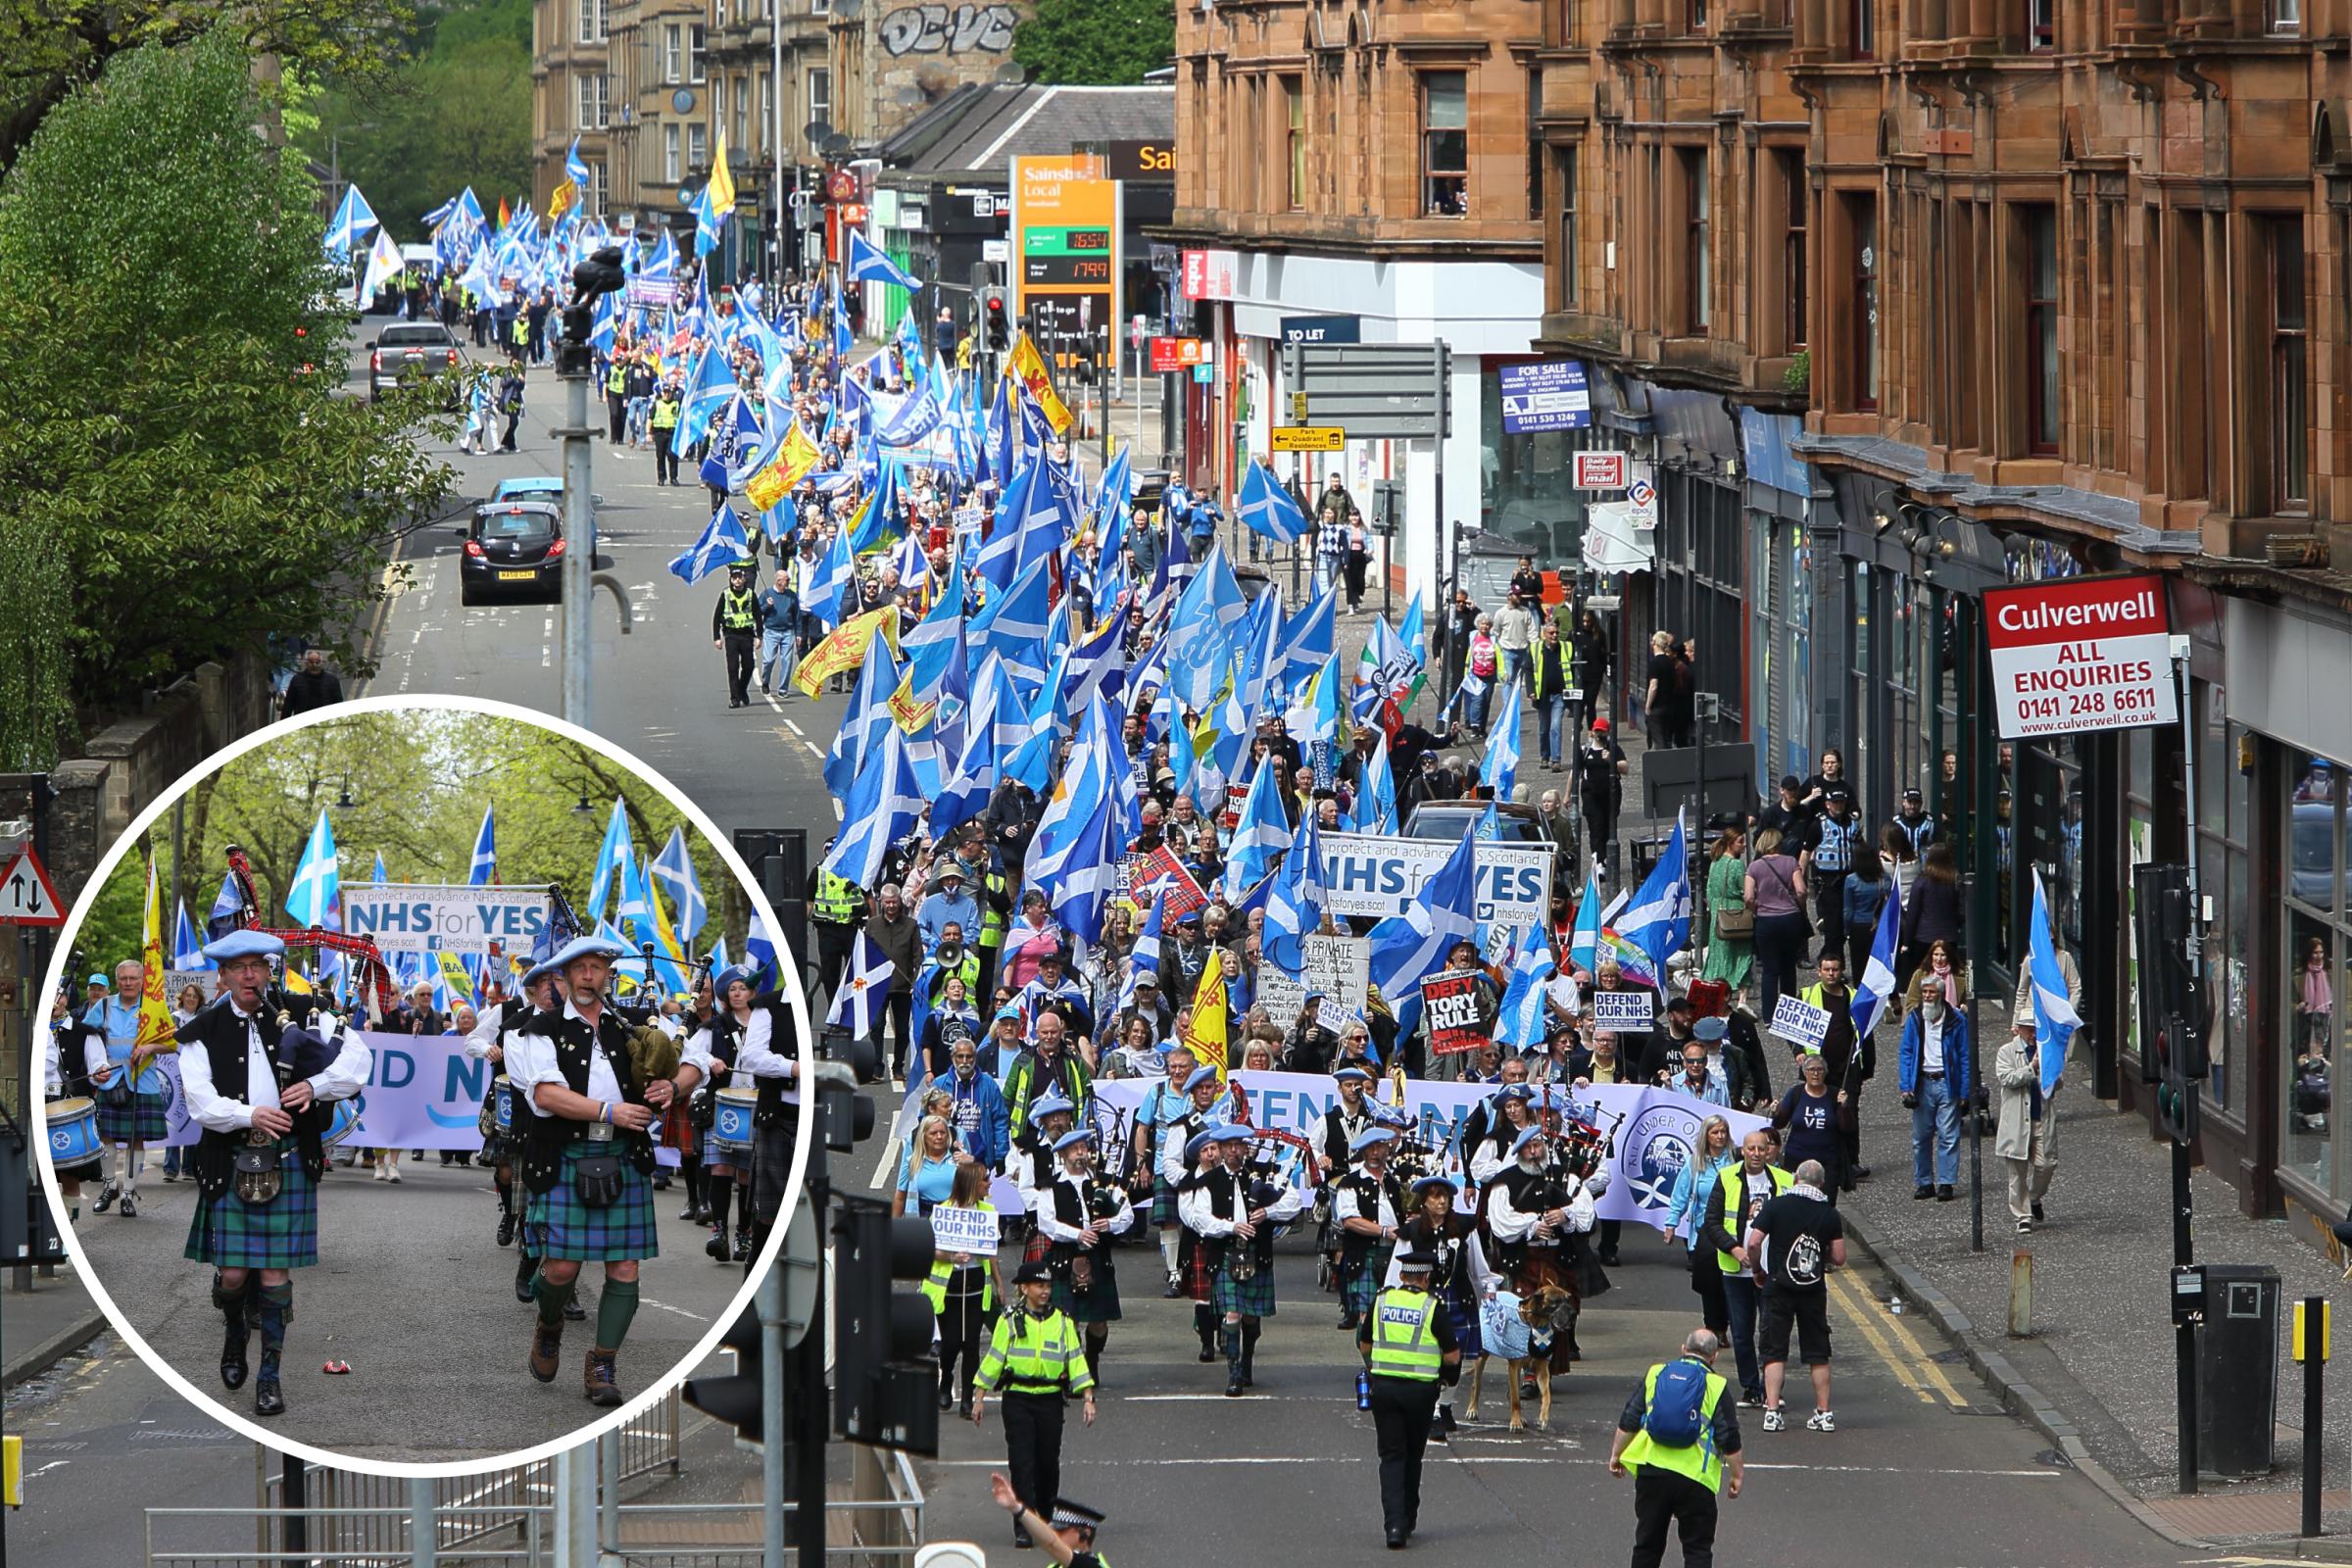 In pictures: Hundreds take part in All Under One Banner March in Glasgow